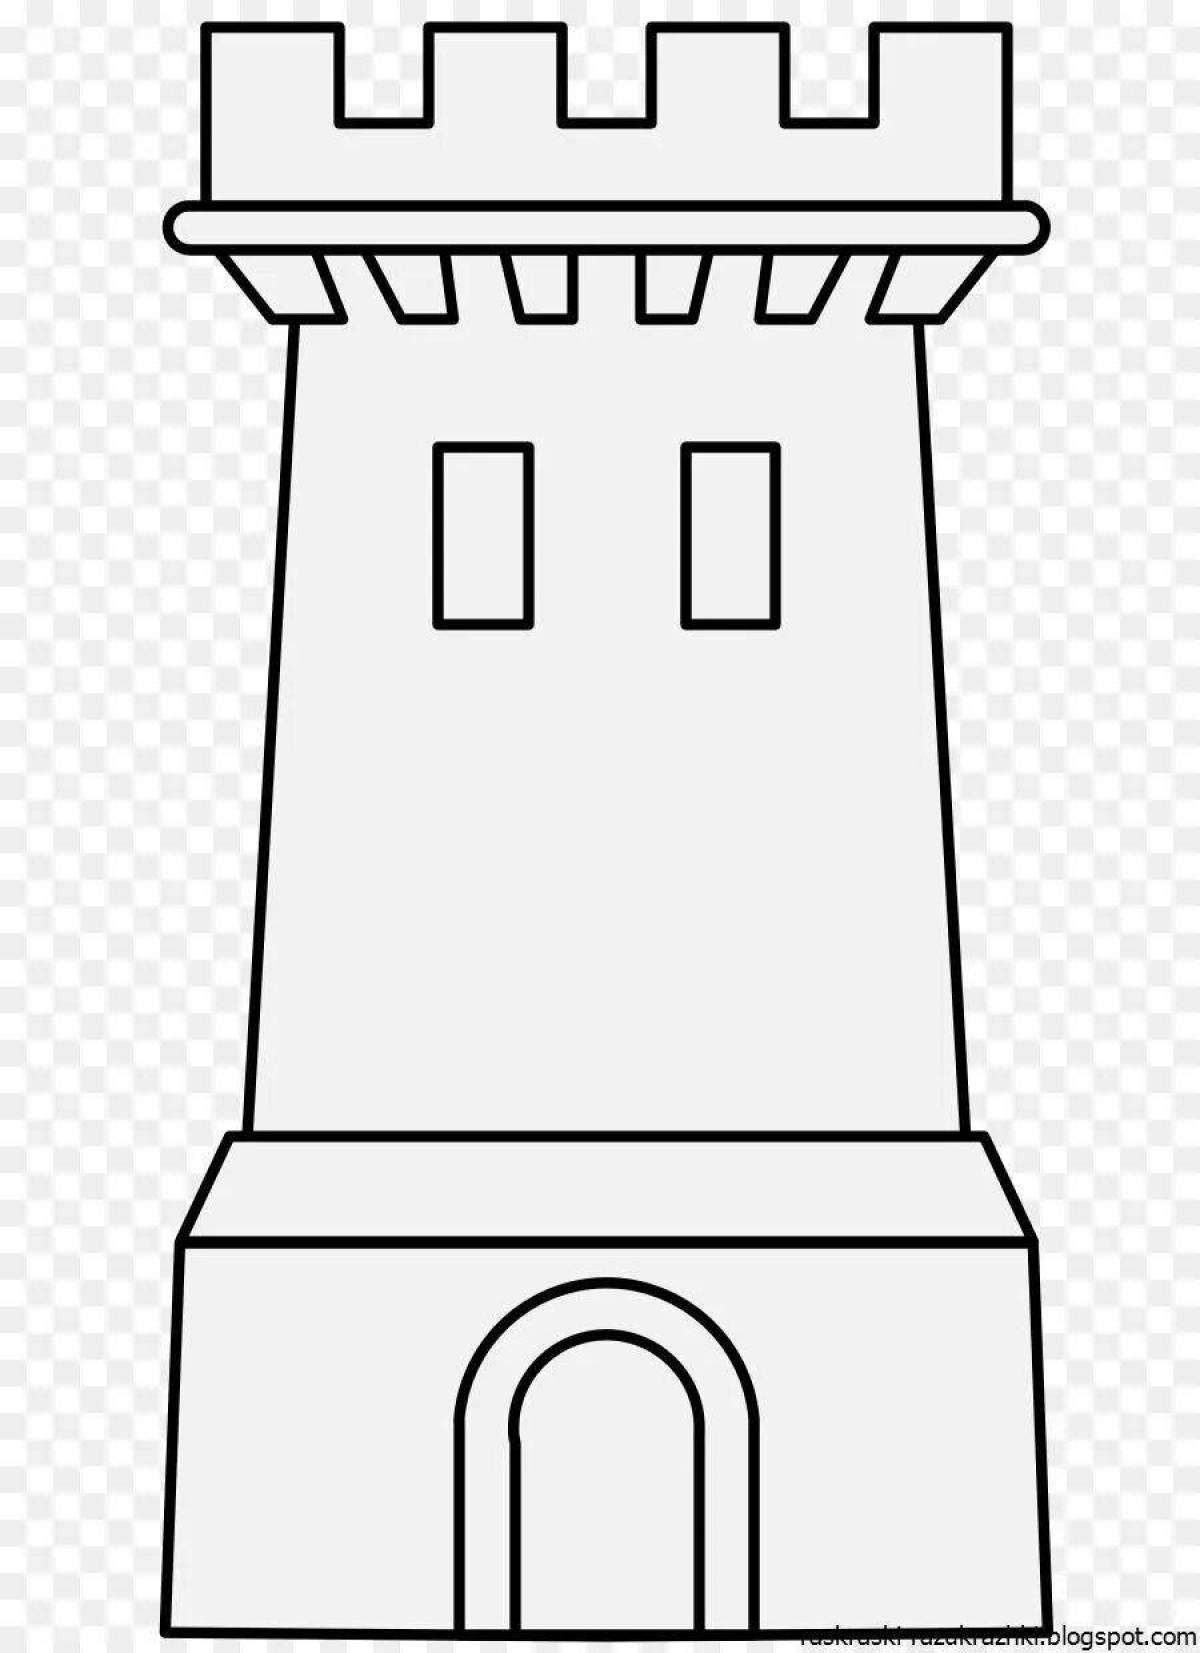 Awesome tower coloring page for kids